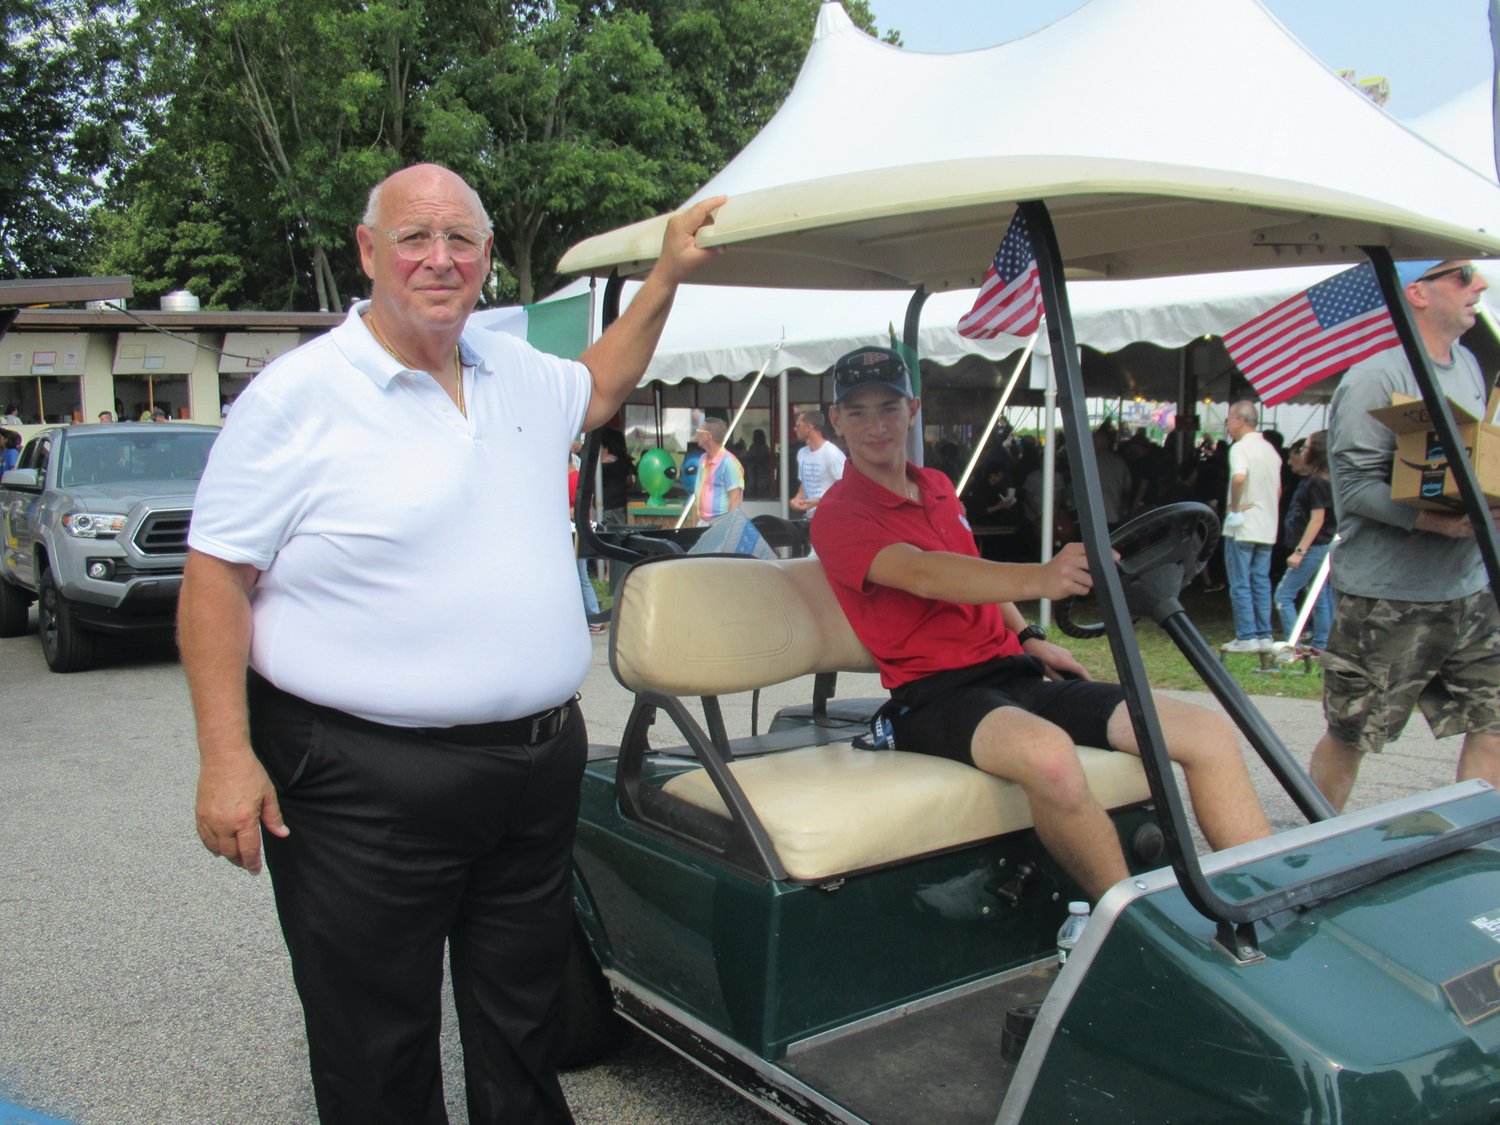 AWESOME ASSIST: Rev. Peter J. Gower made his way around Festival Field either on foot or in this golf cart driven by Nicholas Williams, who performed many duties last week, and provided valuable assistance for older parishioners to get around the grounds.